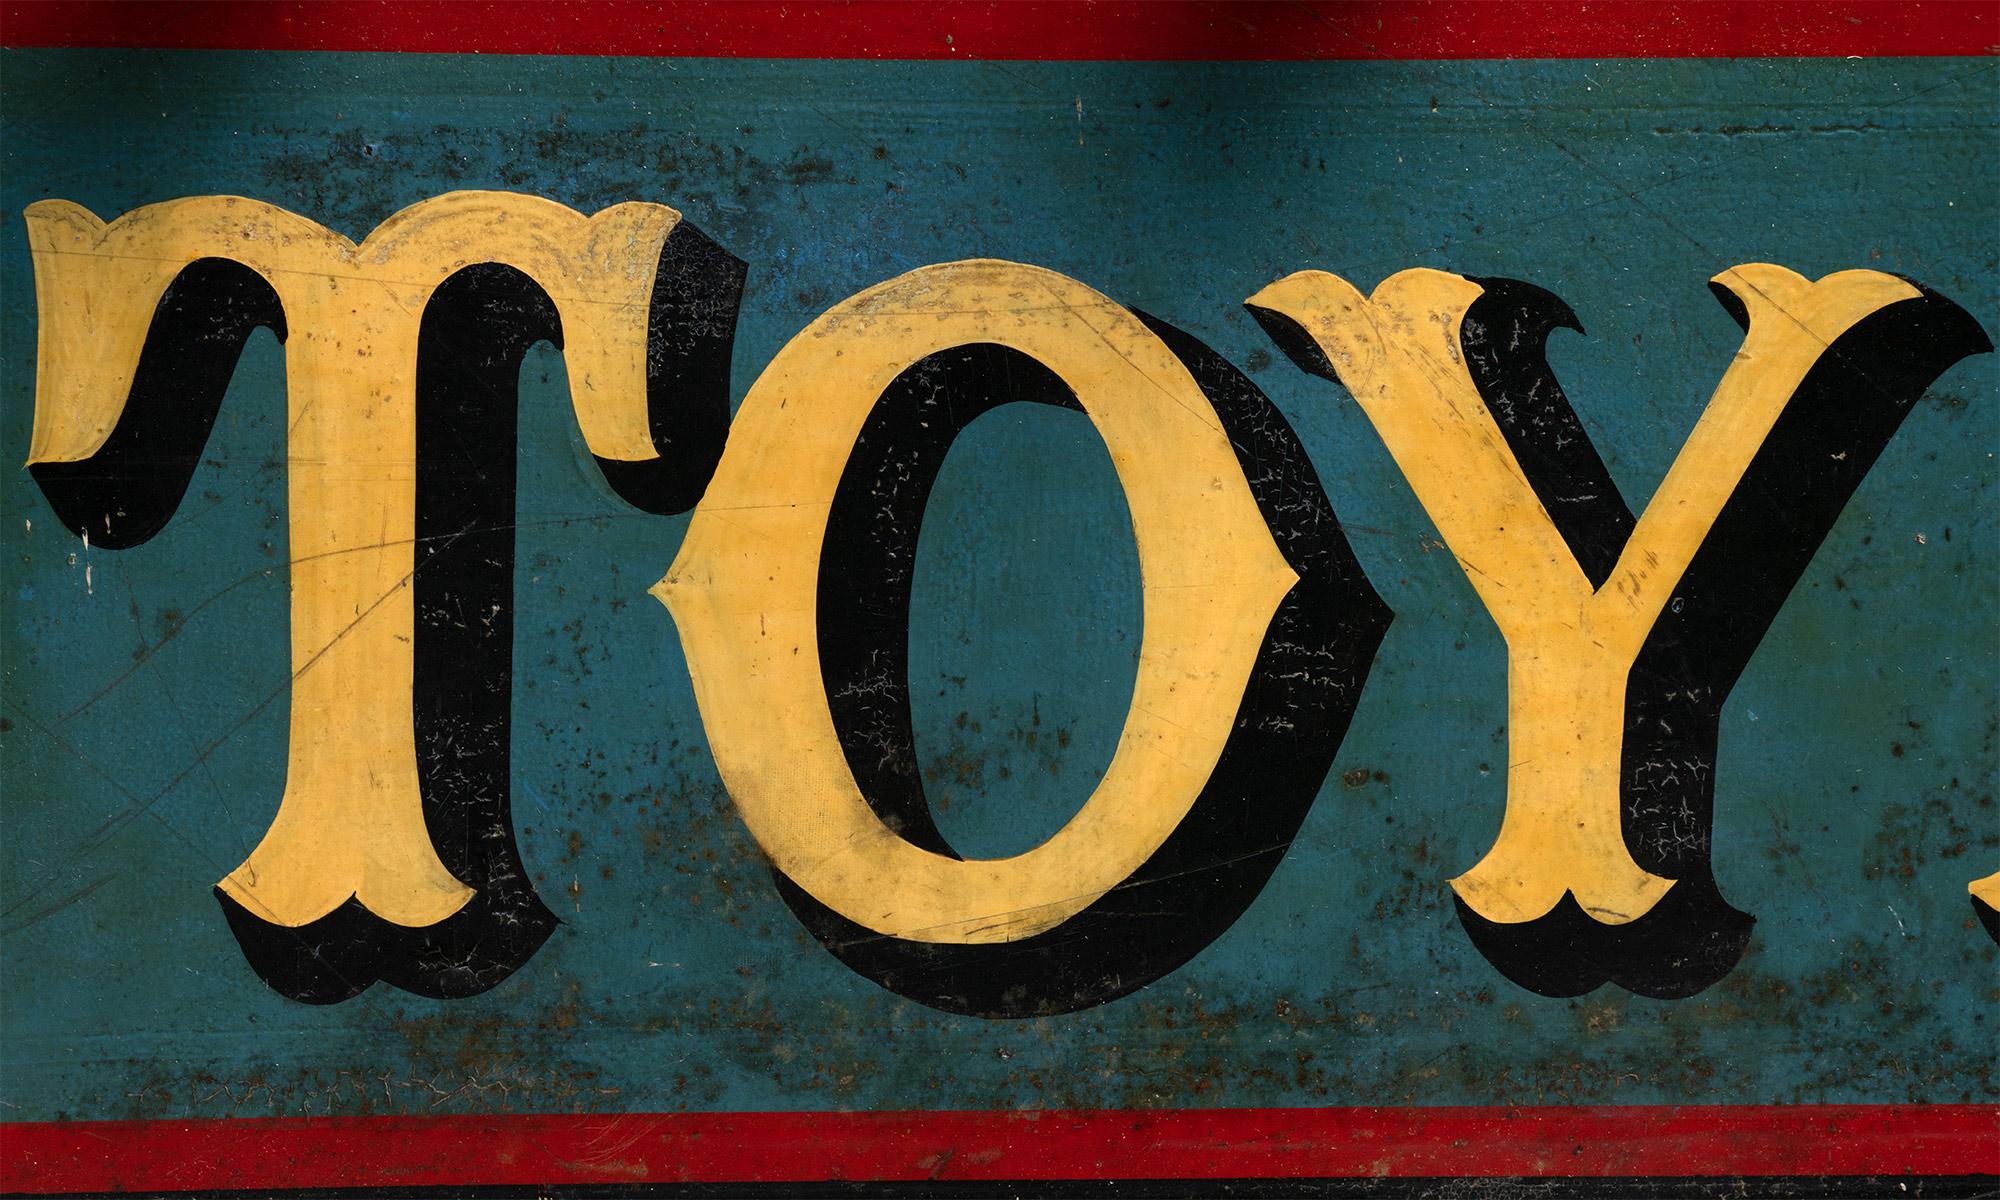 70 inch long “Toyland” Fairground Sign

England Circa 1930

Hand Painted fairground sign bordered with circus lights.

Measures: 70.5” L x 29” H x 3” D.